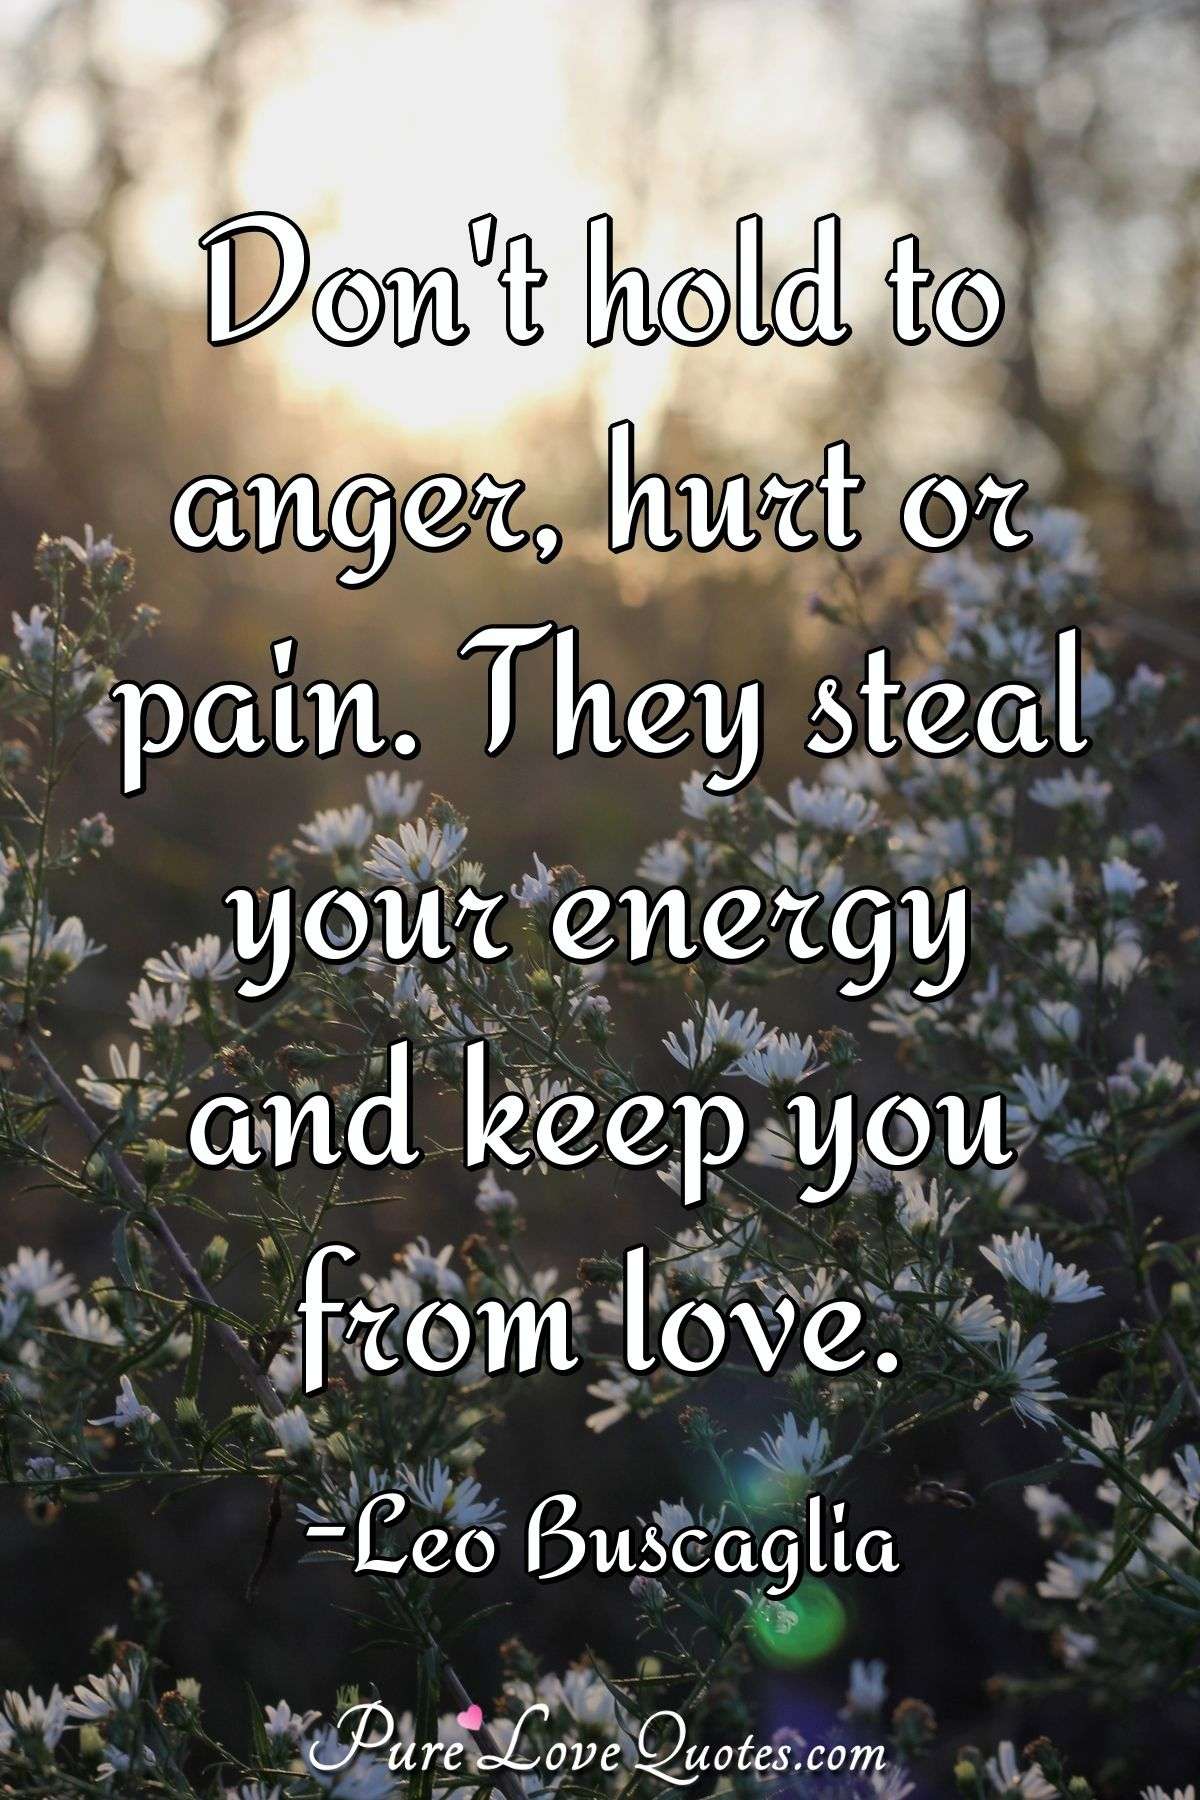 Don't hold to anger, hurt or pain. They steal your energy and keep you